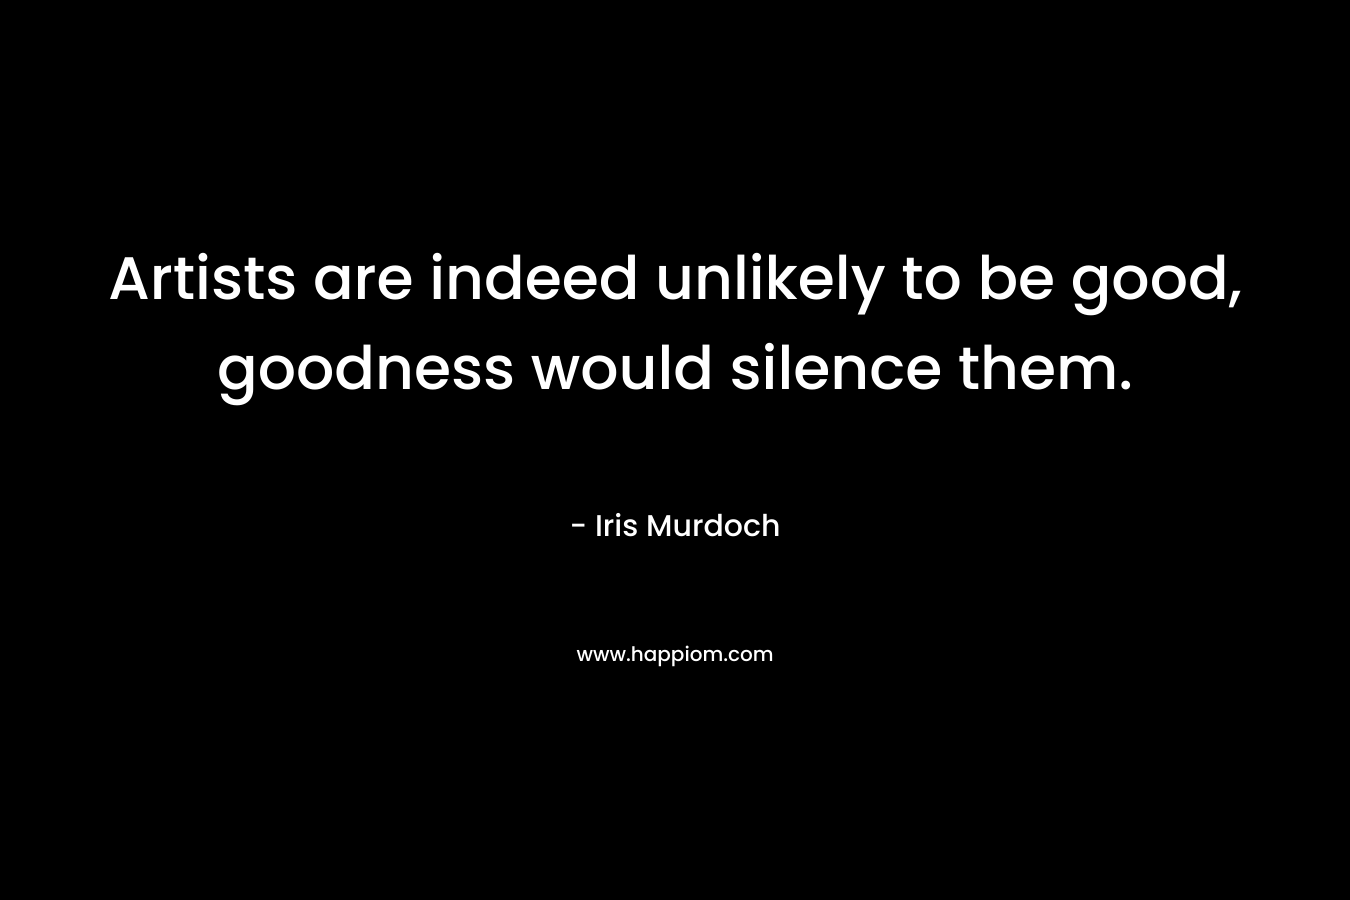 Artists are indeed unlikely to be good, goodness would silence them.